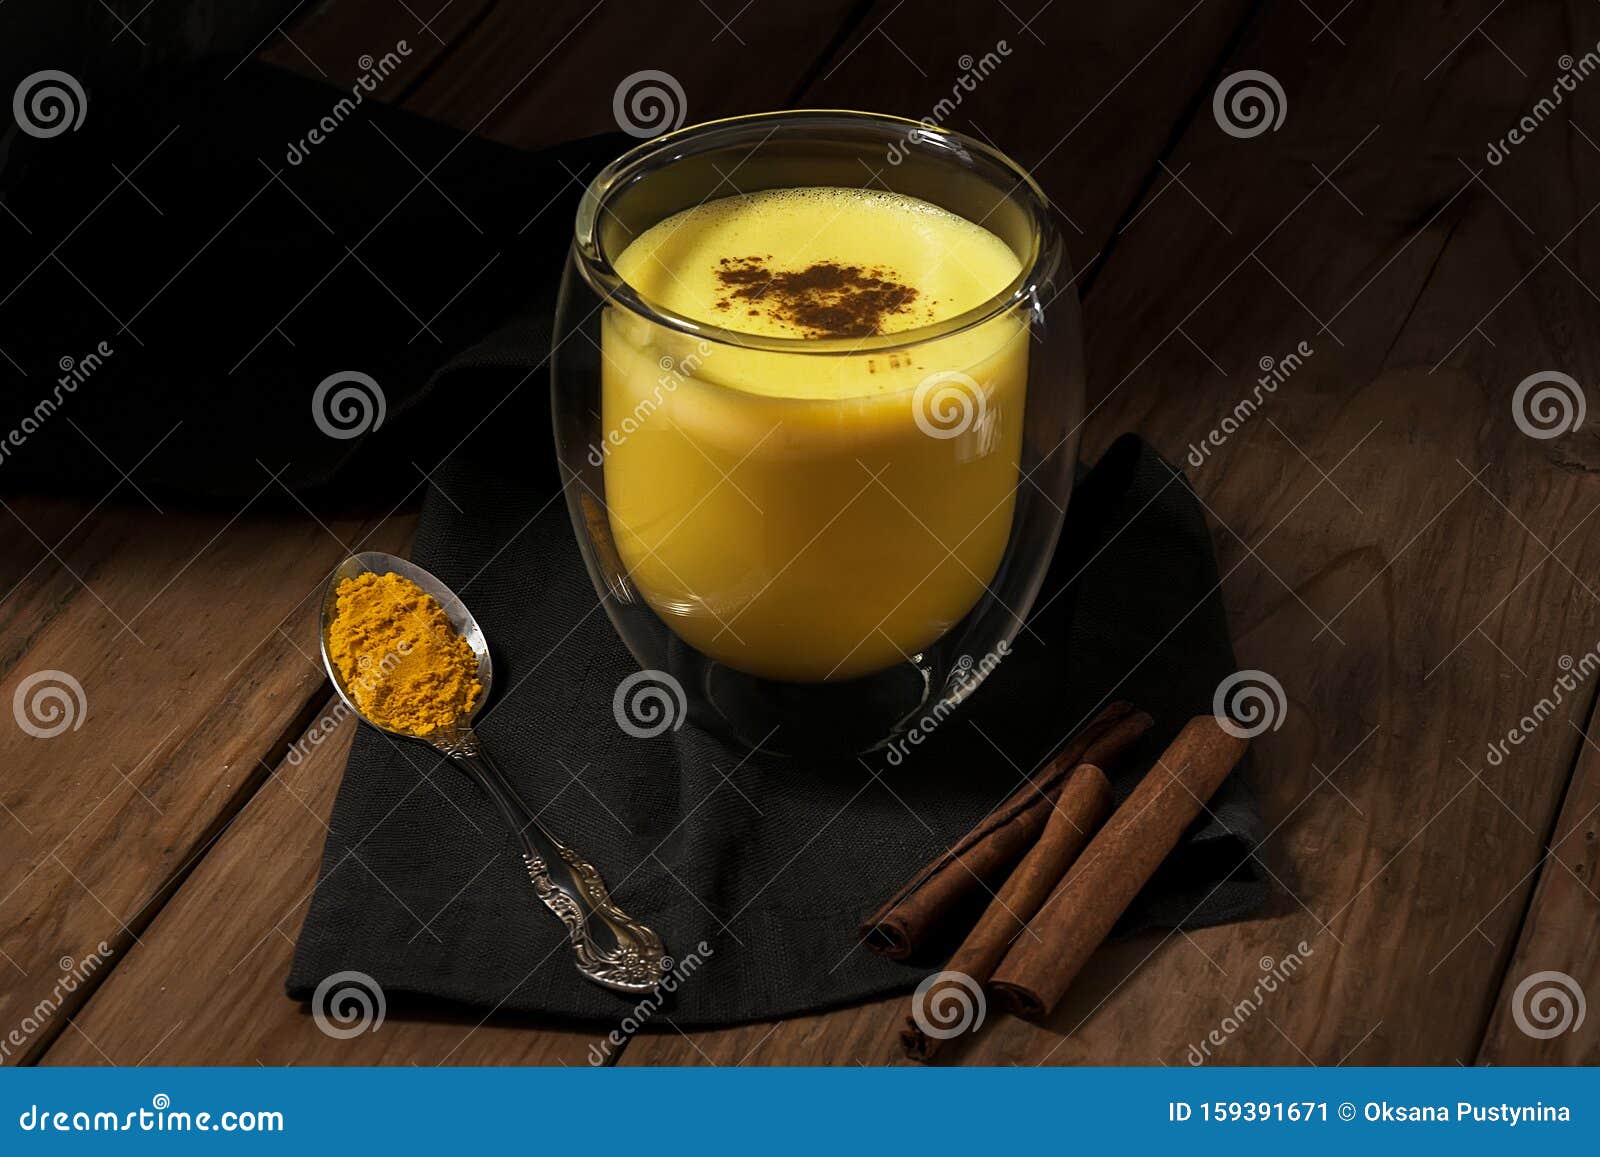 Traditional Indian Drink. Golden Latte, Turmeric Milk With Spice On A ...